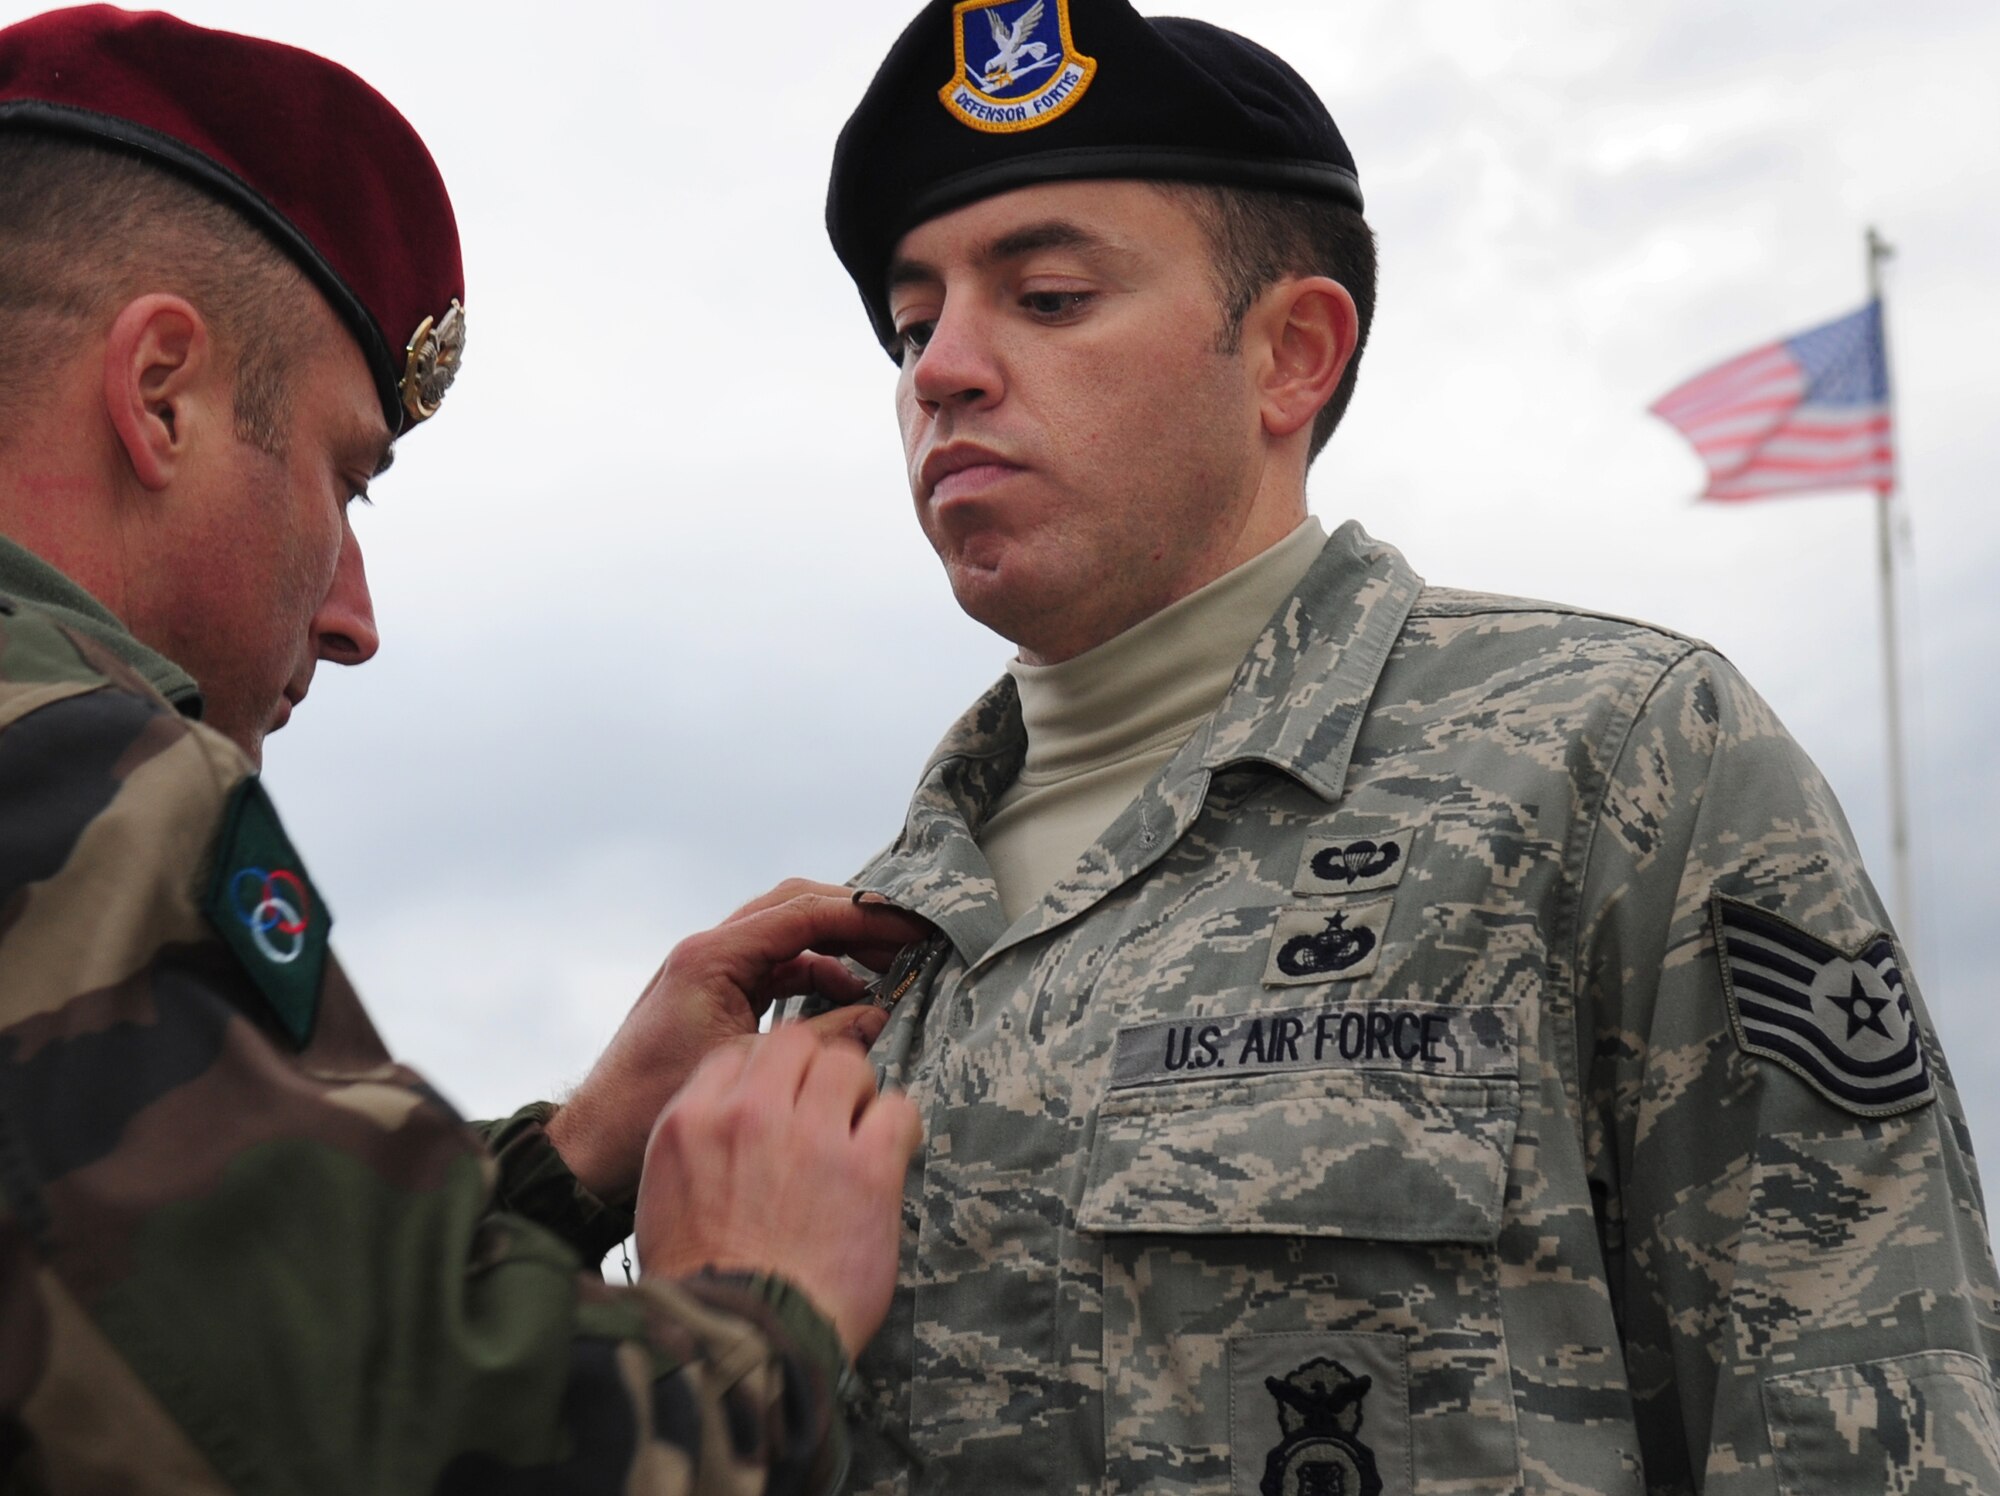 After a week of training and jumping together, Academy instructor Master Sgt. Stephane Paternotte presents U.S. Air Force Tech. Sgt. Jason Shaffer French jump wings during a formal ceremony concluding the week, March 4, 2010.  Members of the 435th Contingency Response Group and the 5th Quartermaster Company joined with their French military counterparts for a week of training at the École des troupes aéroportées (ETAP), or School of Airborne Troops, a military school dedicated to training the military paratroopers   of the French army, located in the town of Pau, in the département  of Pyrénées-Atlantiques , France.  The ETAP is responsible for training paratroopers, and for international cooperation and promotion of paratroop culture. (U.S. Air Force Photo by Staff Sgt. Jocelyn Rich)